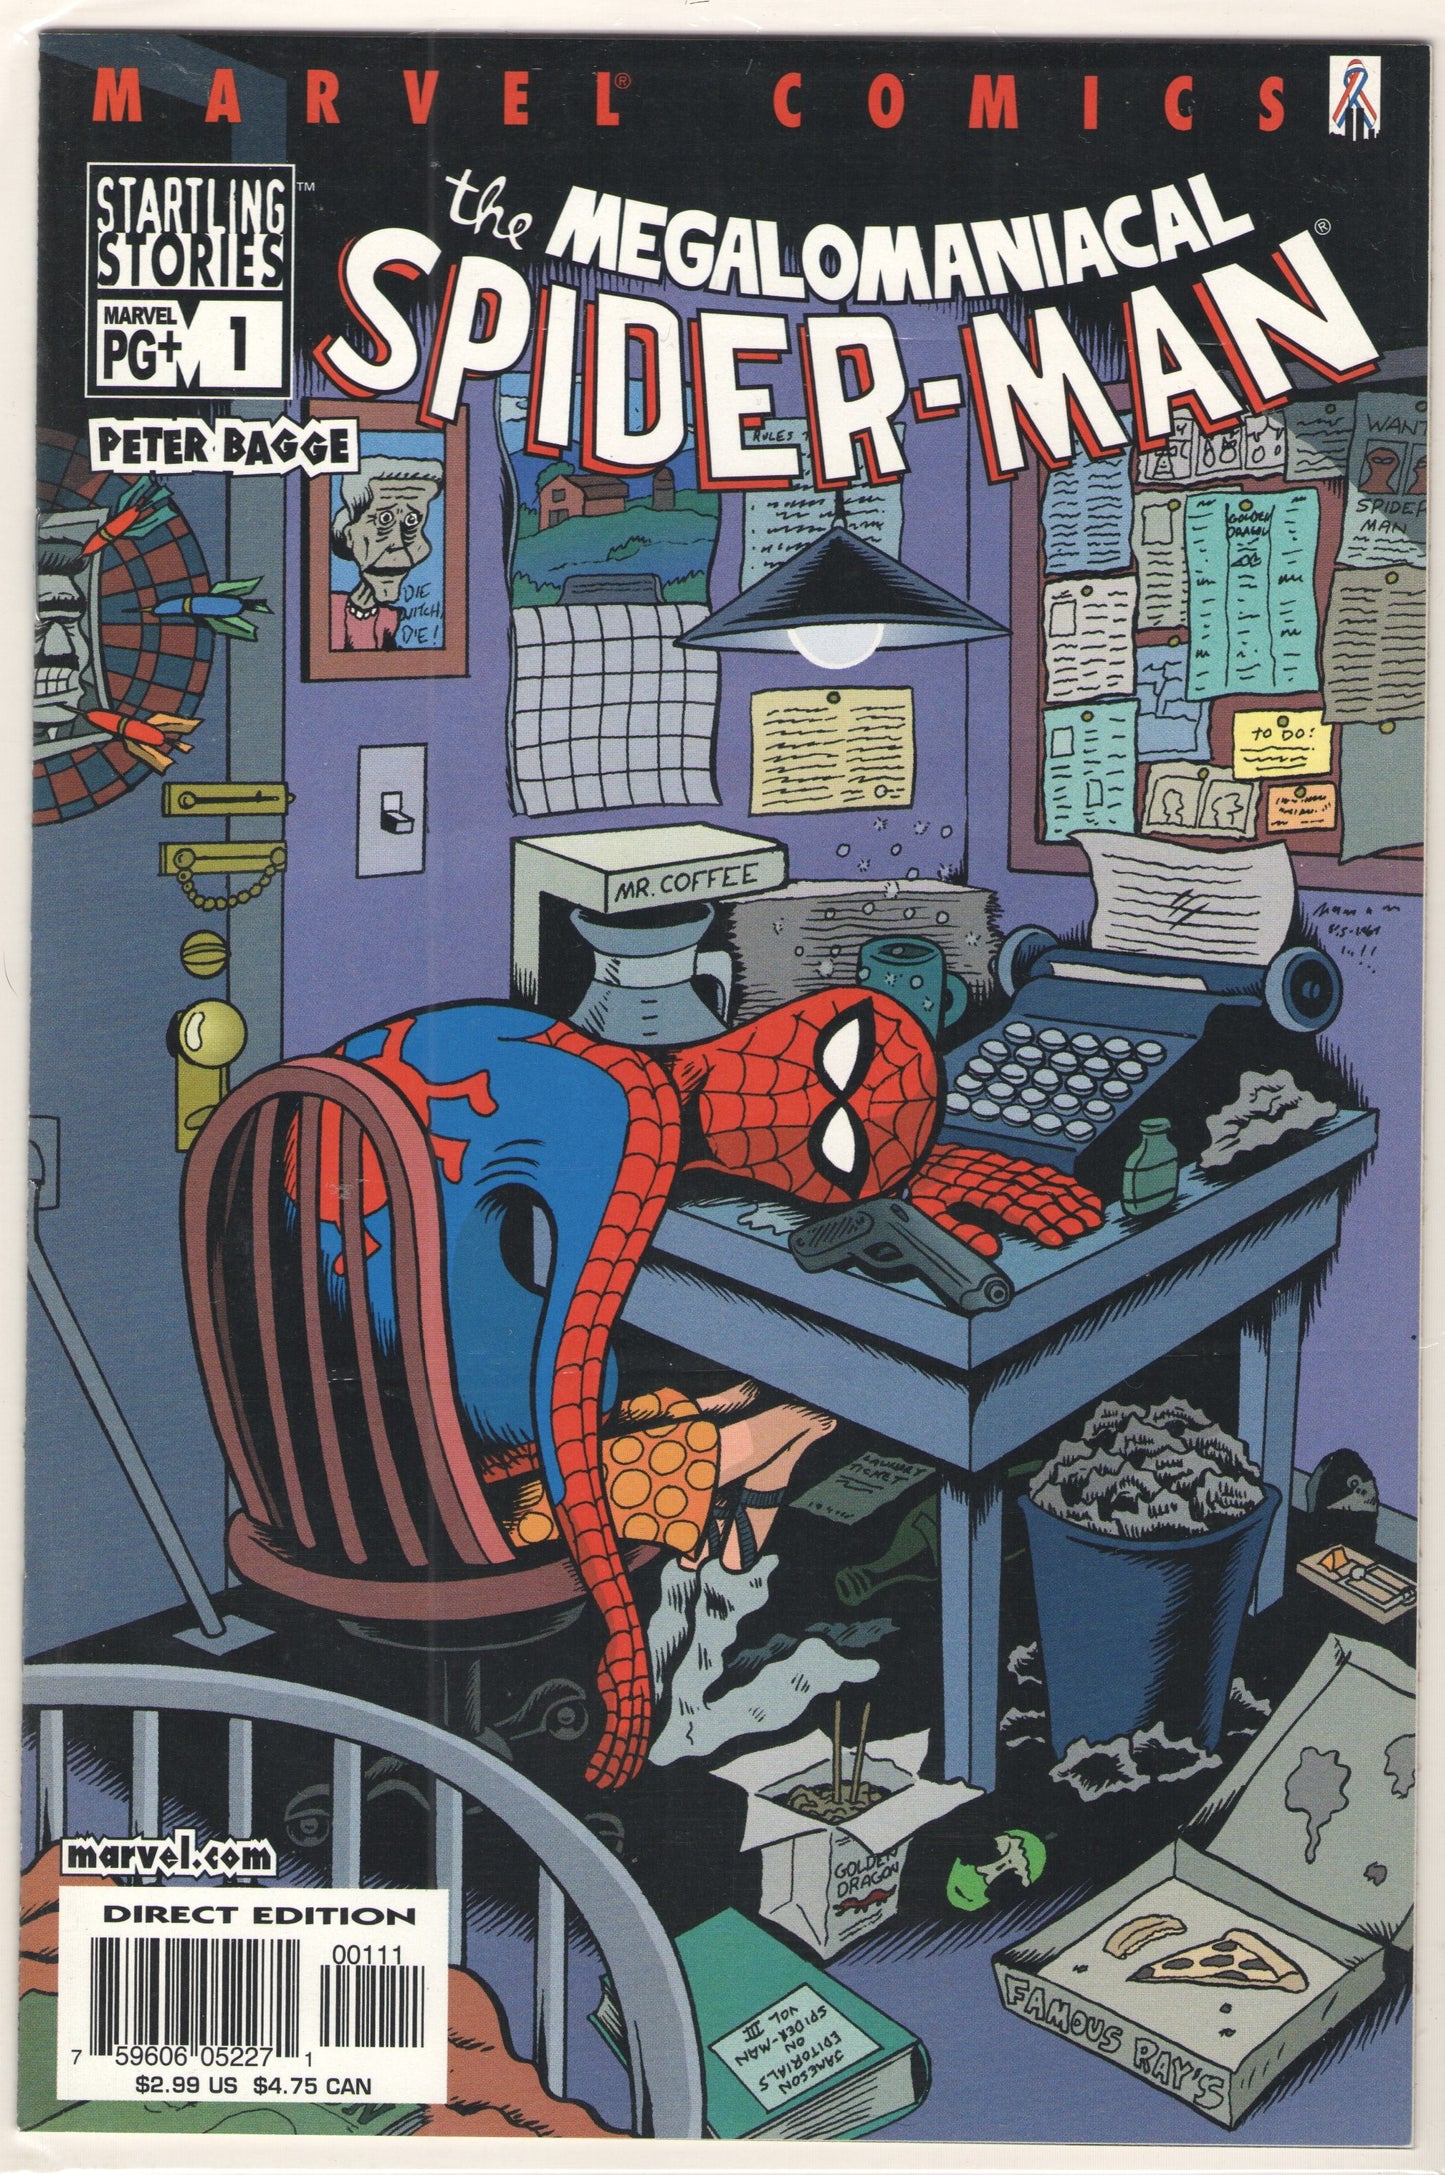 Startling Stories: The Megalomaniacal Spider-Man (2002) One-Shot